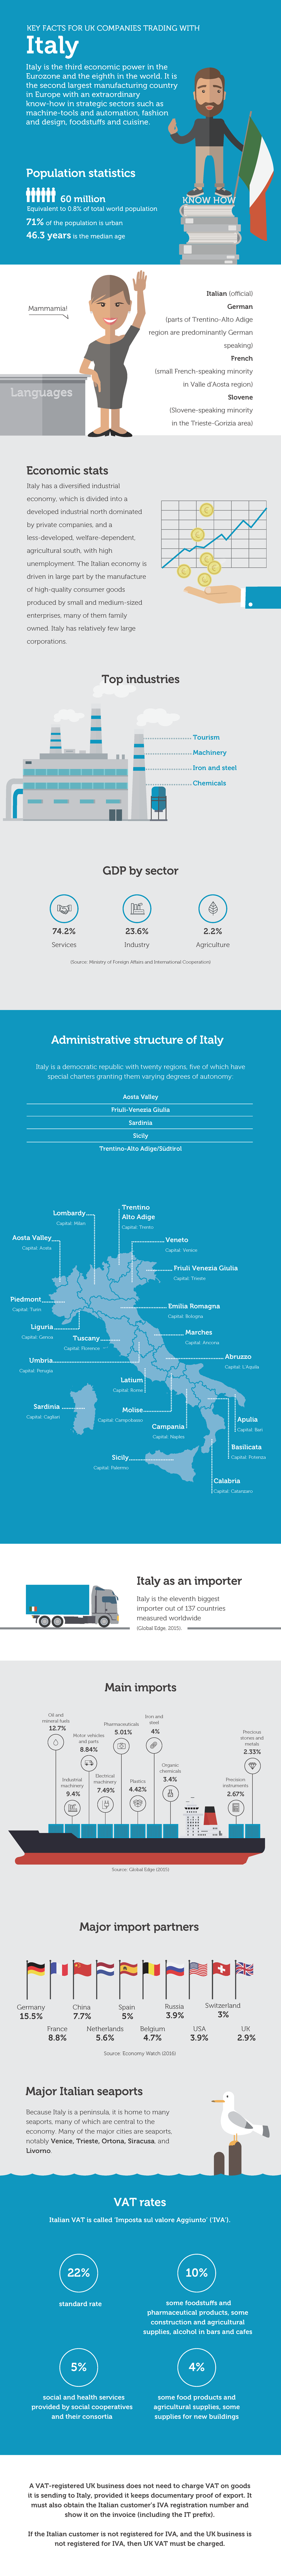 Key facts for UK businesses trading with Italy Infographic